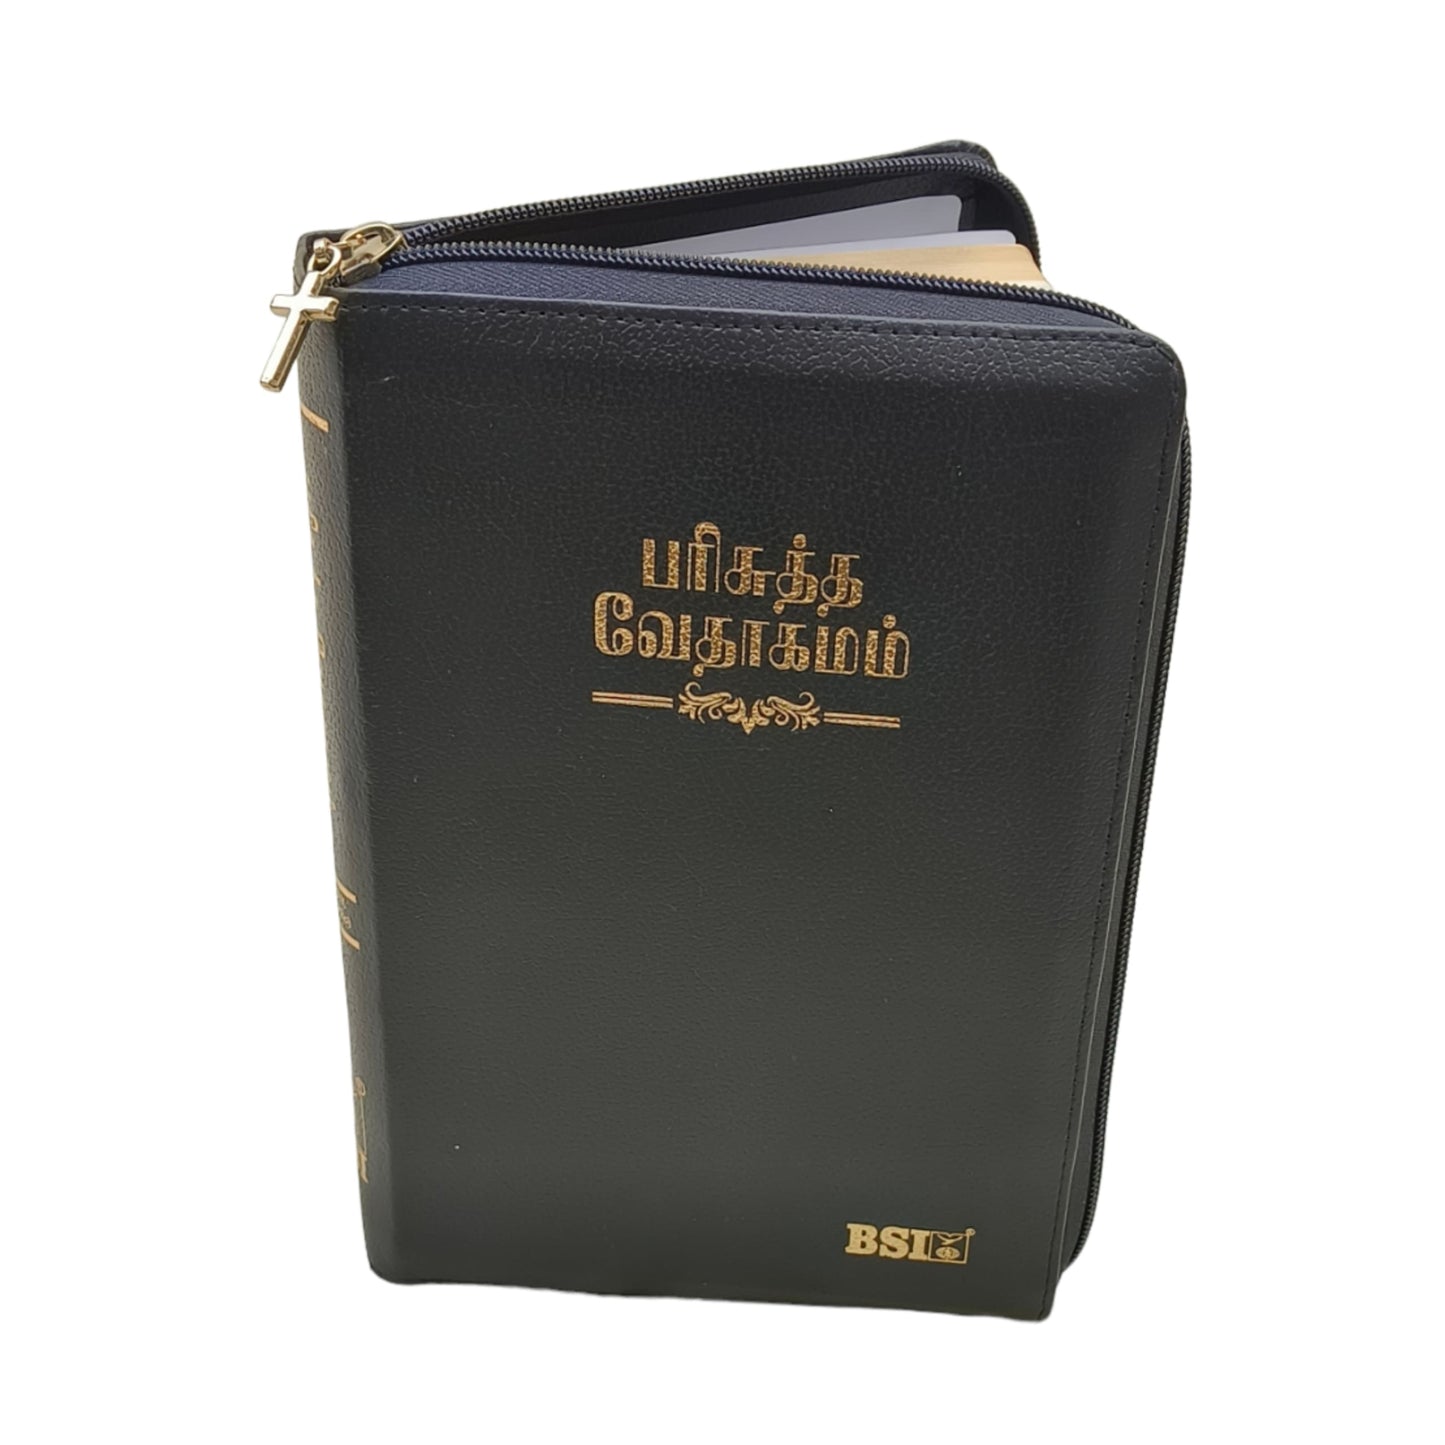 Tamil Bible Black leather Cover With Index And Cross Zip